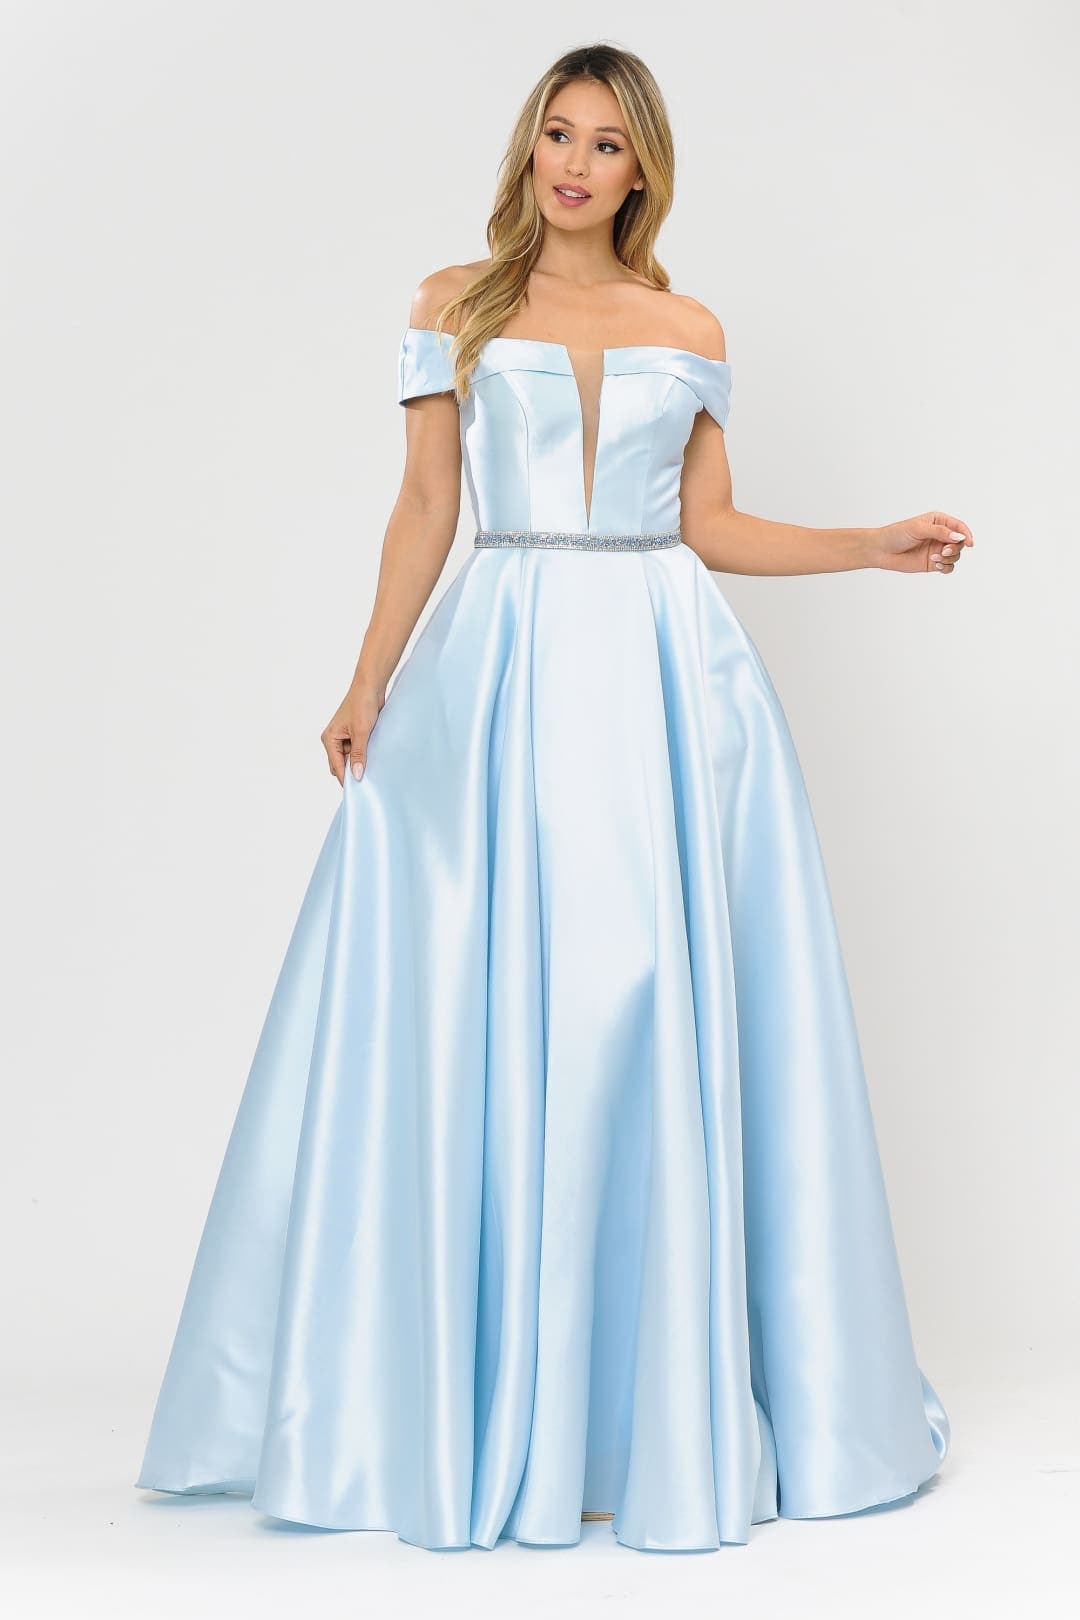 Classy Prom Off The Shoulder Dresses - BLUE / XS